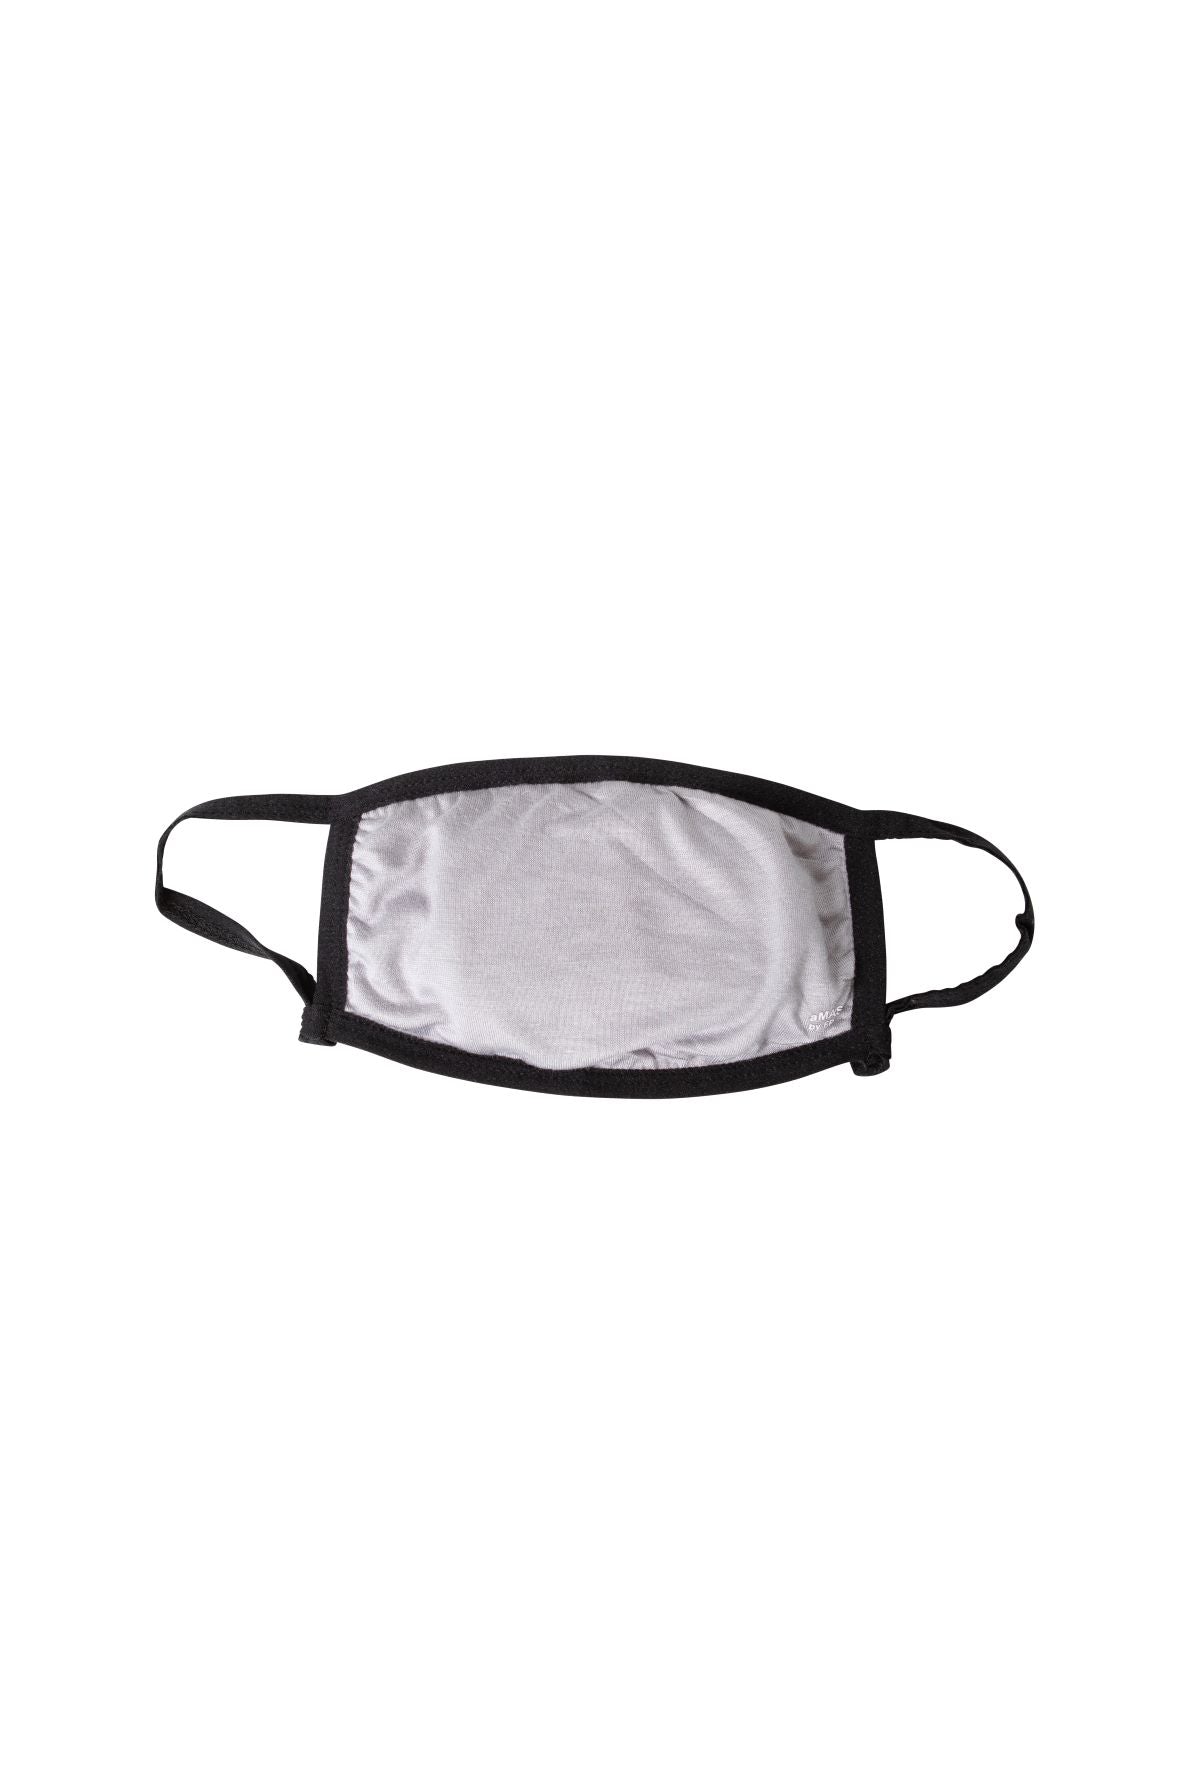 Grey adult breathable face mask.